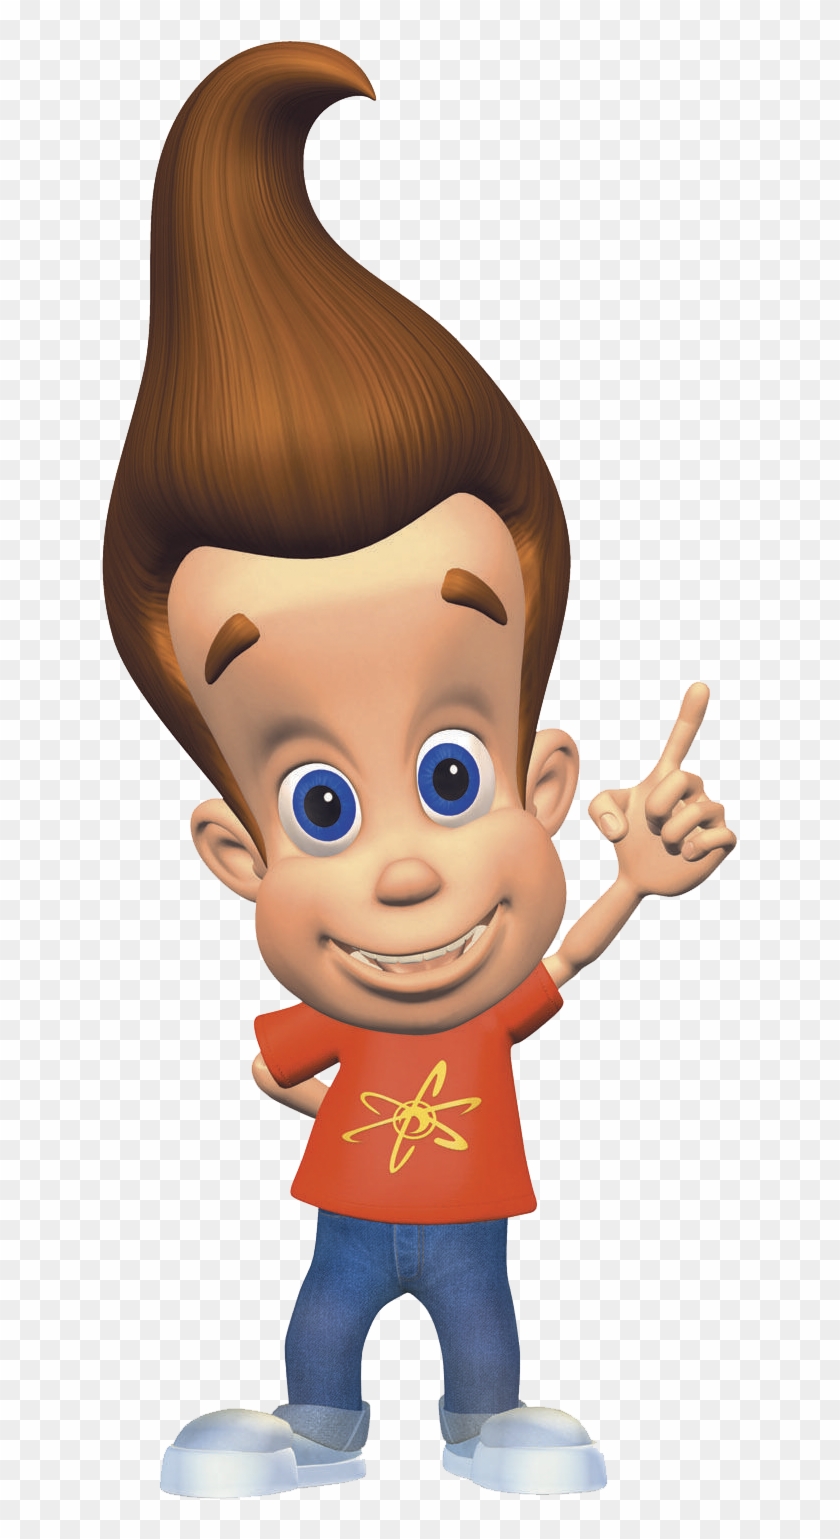 Tenth Doctor Tardis Fandom Powered By Wikia Jimmy Neutron Free Transparent Png Clipart Images Download - magics roblox arcane adventures wikia fandom powered by